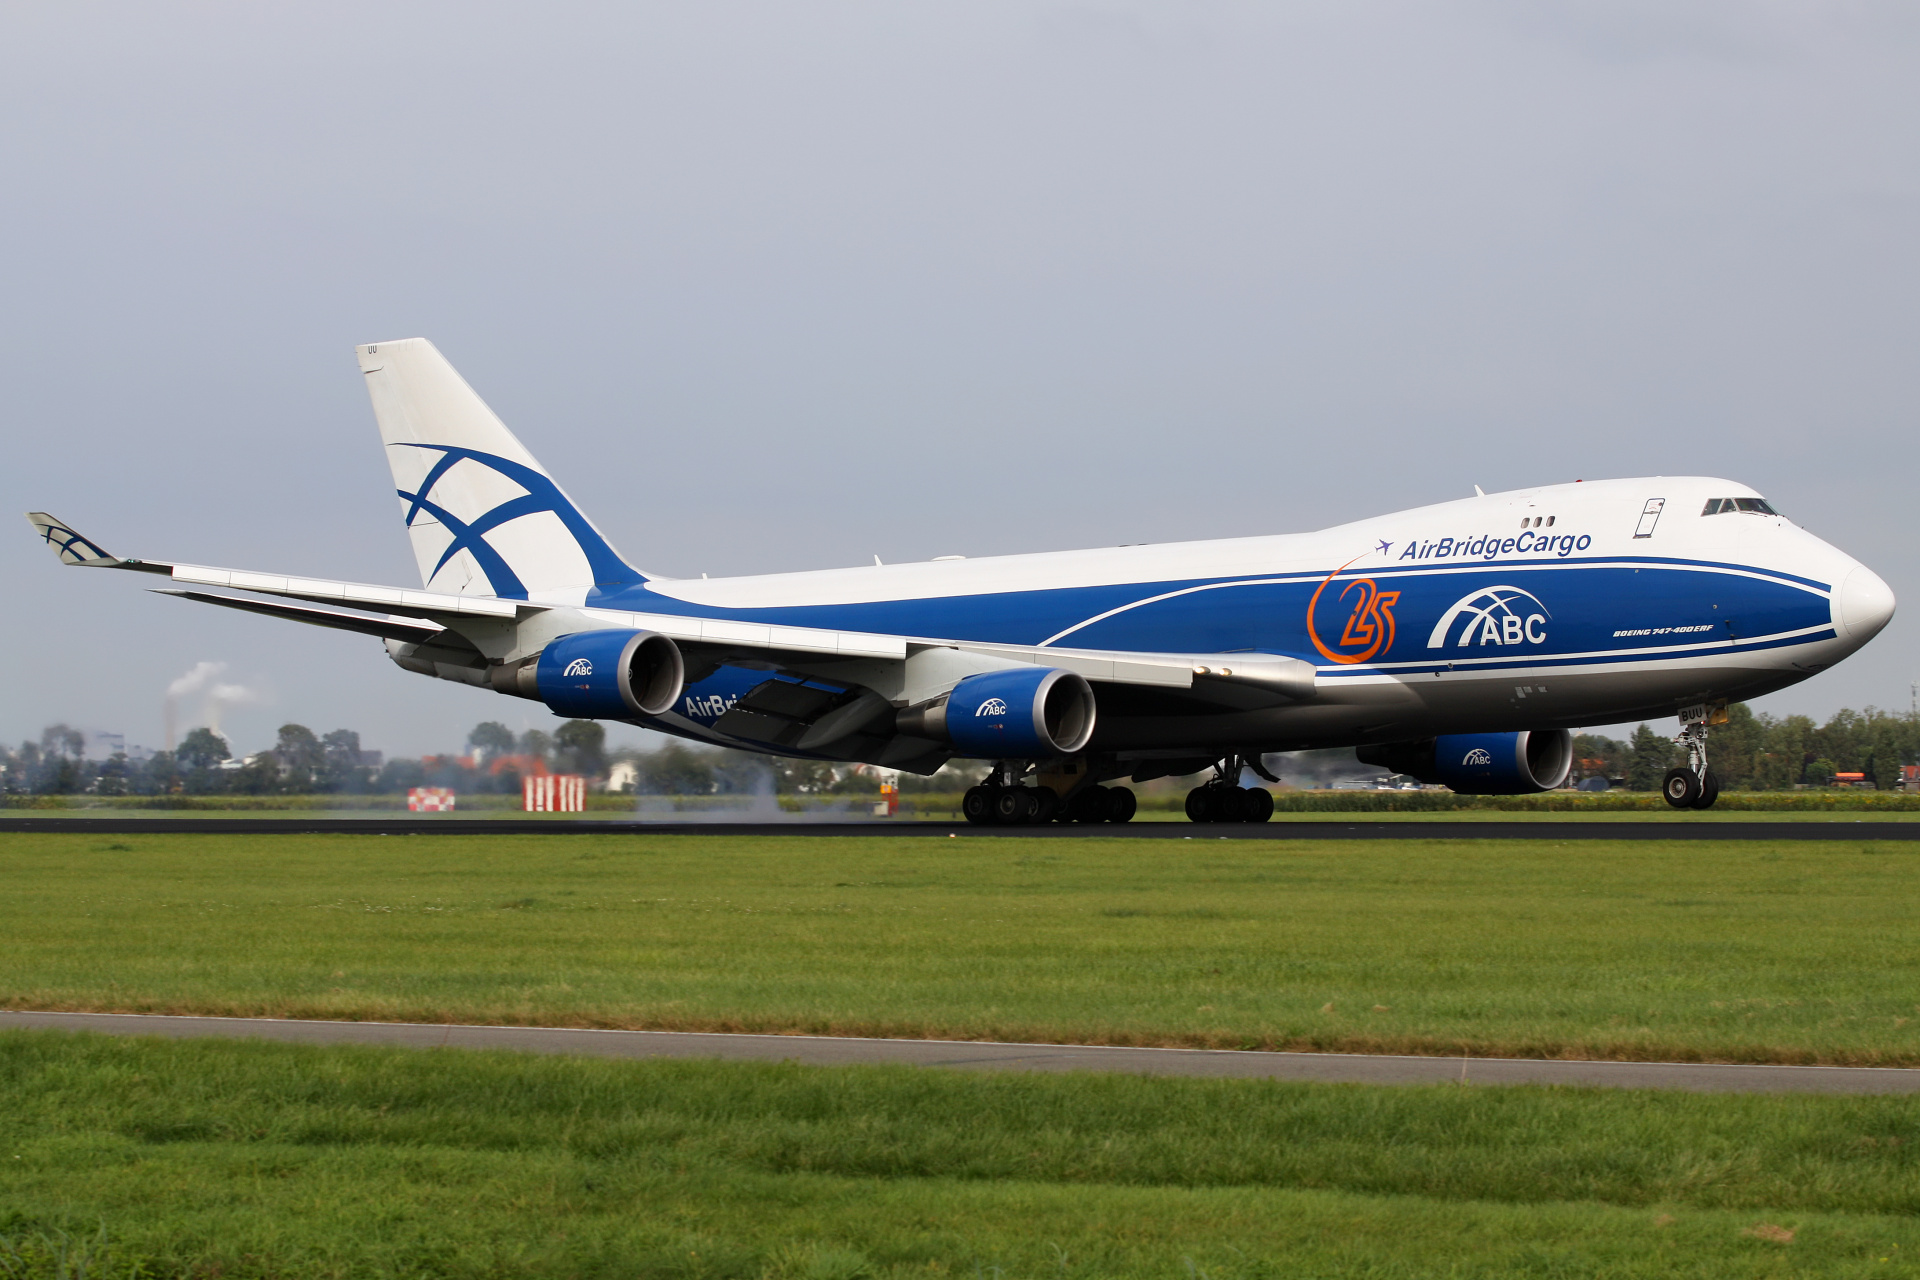 VQ-BUU, AirBridgeCargo Airlines (25 years livery) (Aircraft » Schiphol Spotting » Boeing 747-400F)